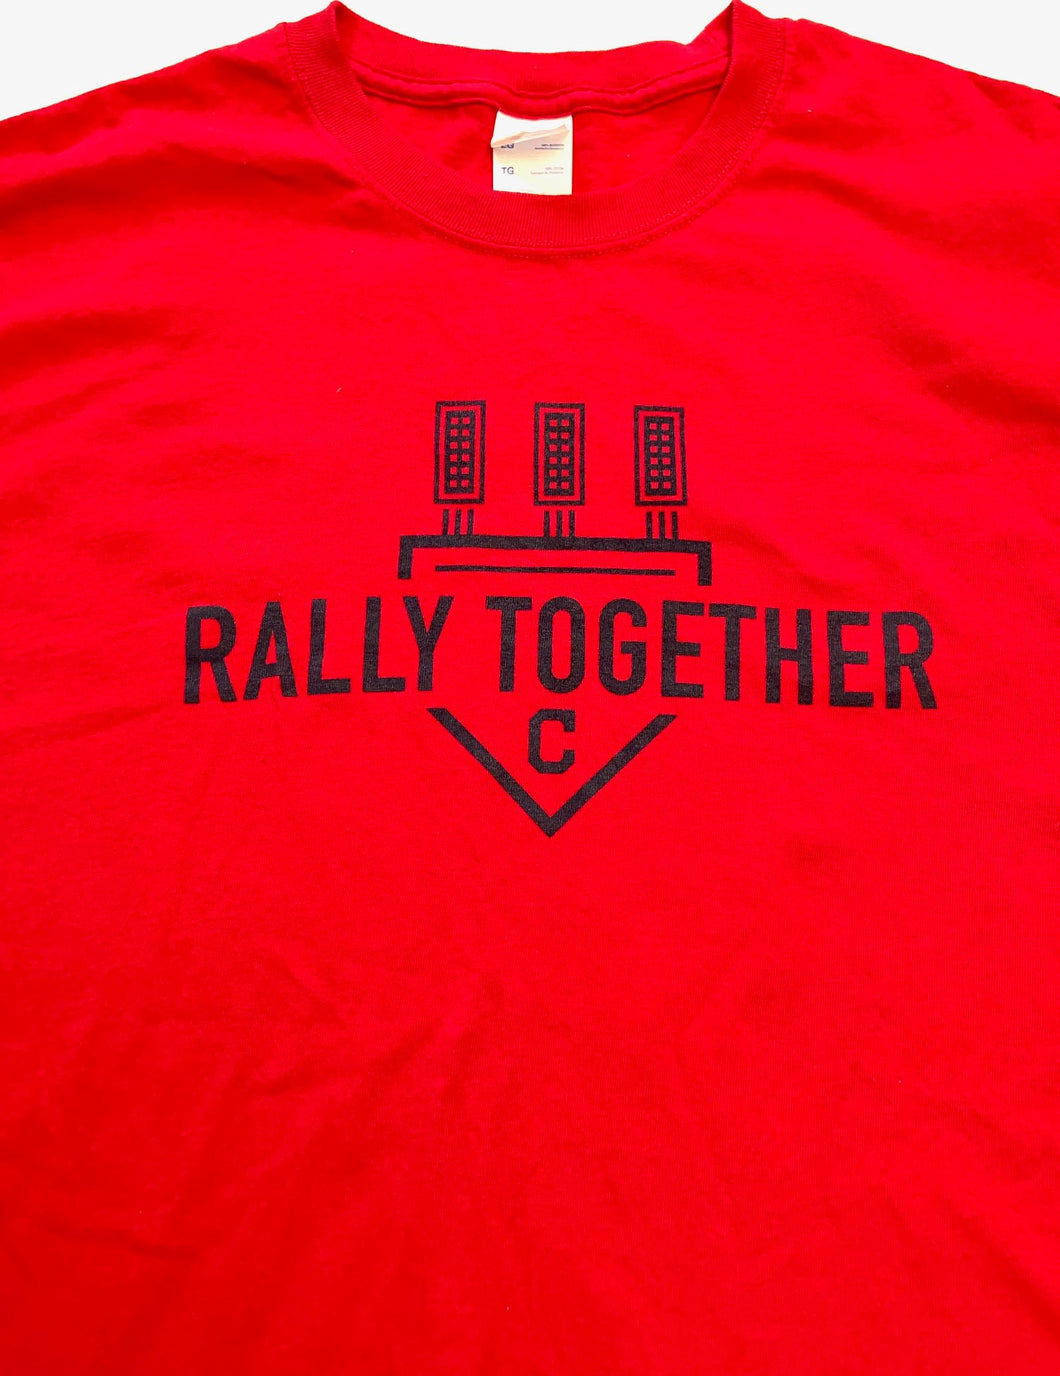 Cleveland Baseball 2018 Rally Together Adult X-Large Red (Used) T-Shirt by Port & Co.